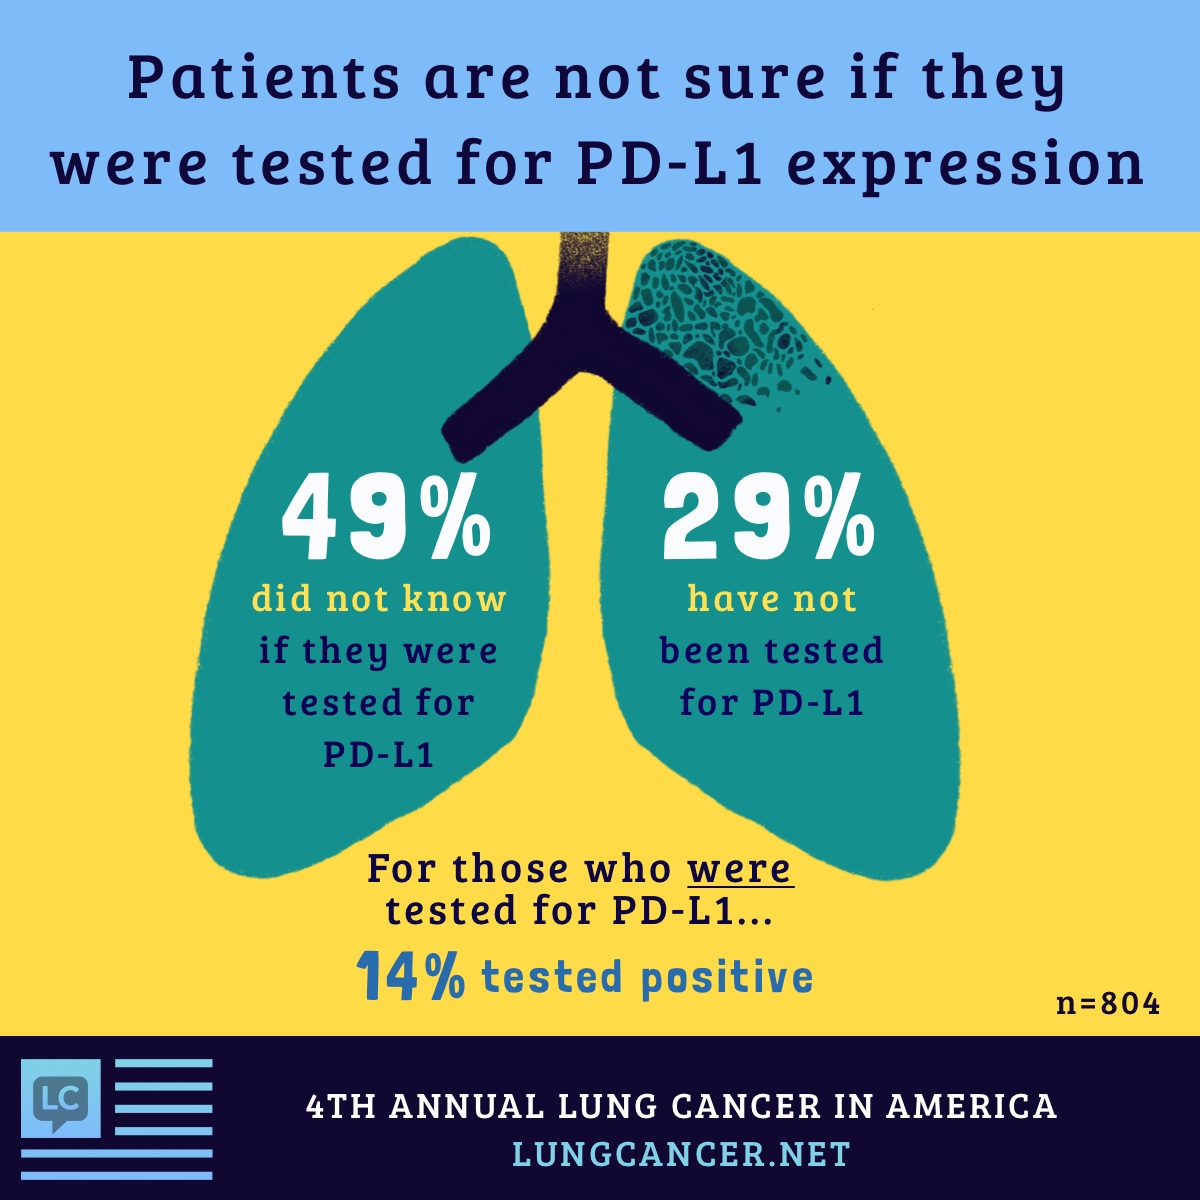 People are not always sure if they were tested for PD-L1 expression with 49% unsure and 29% who were not tested. For those who were tested for PD-L1, 14% were positive.